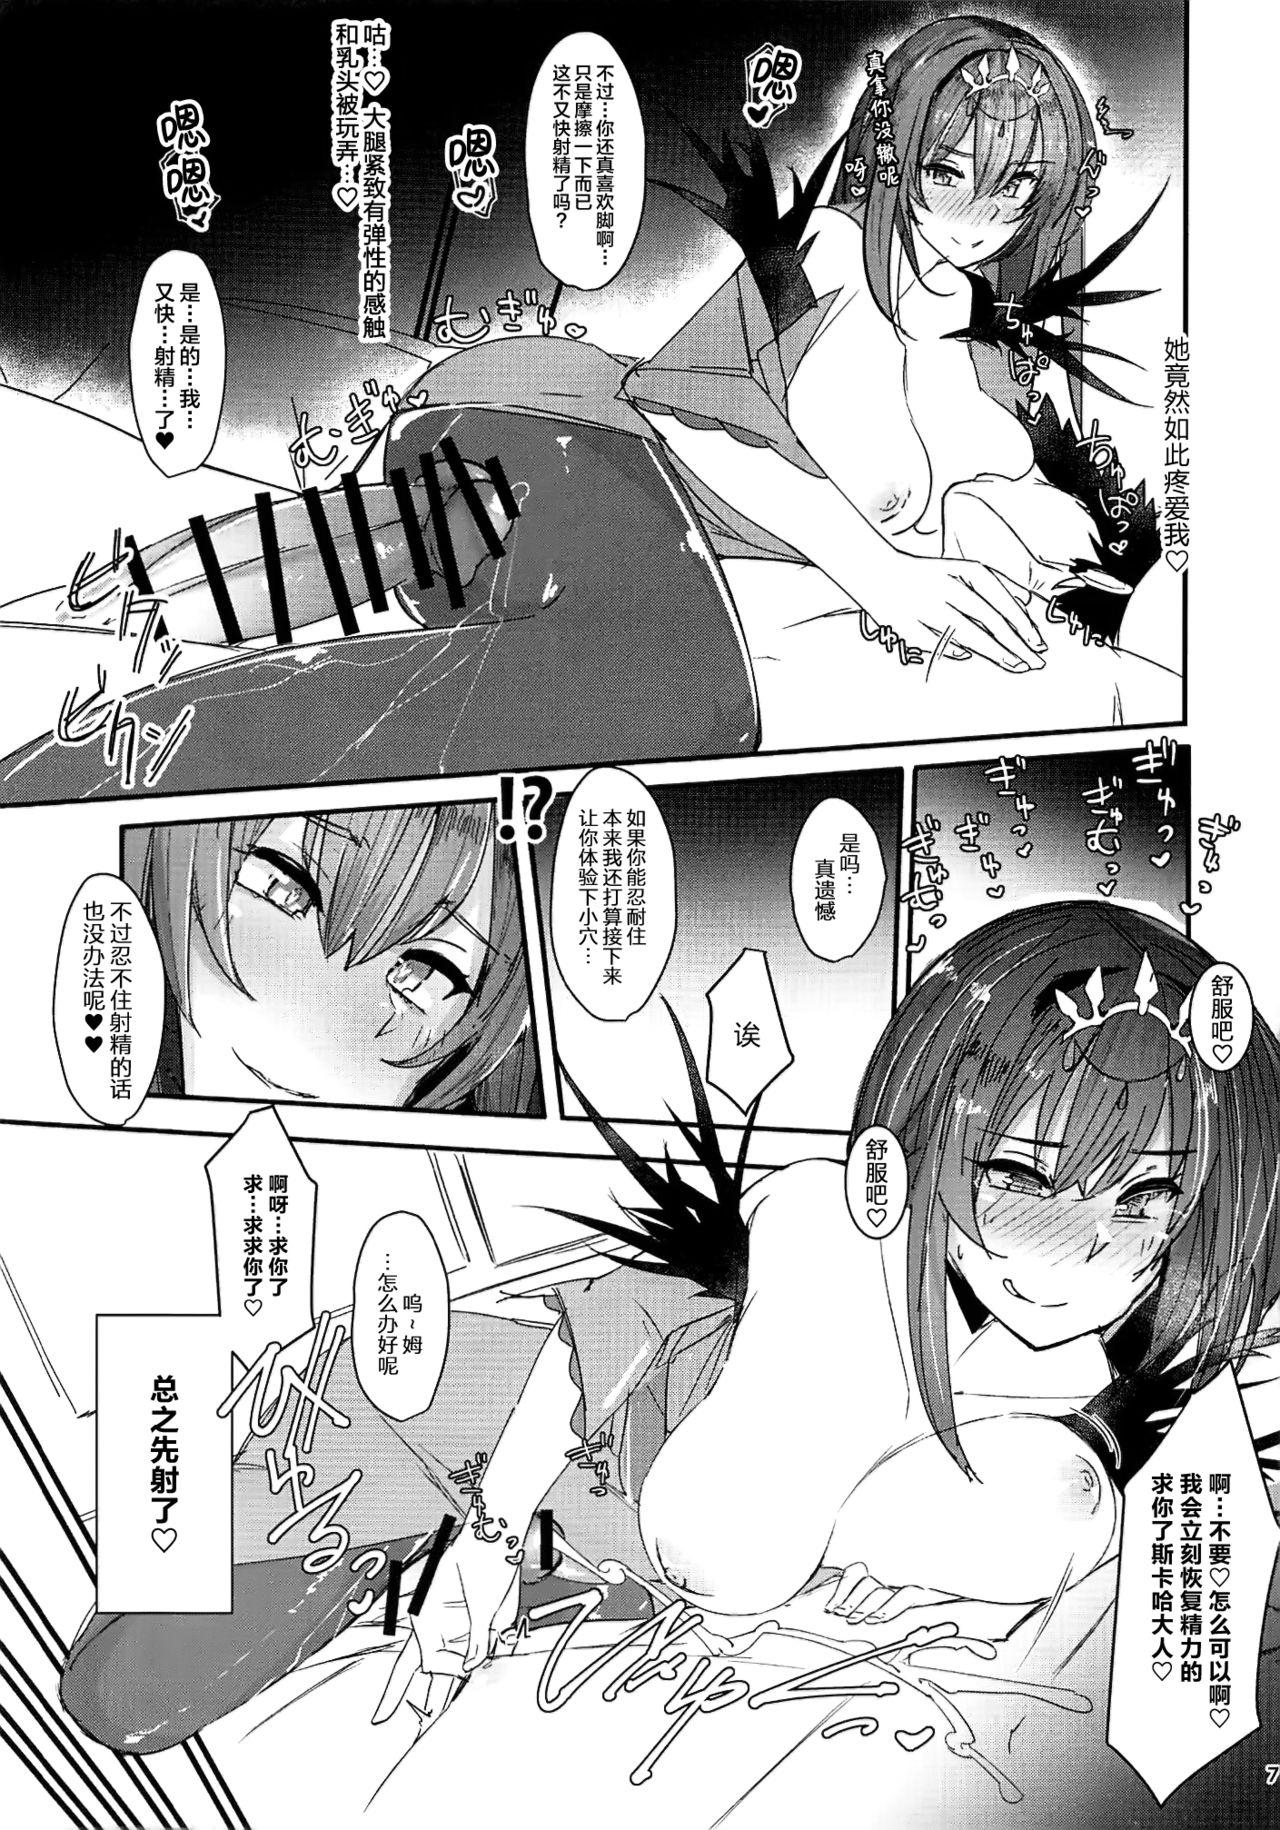 Shecock Funde Scathach-sama - Fate grand order Sex Toys - Page 7